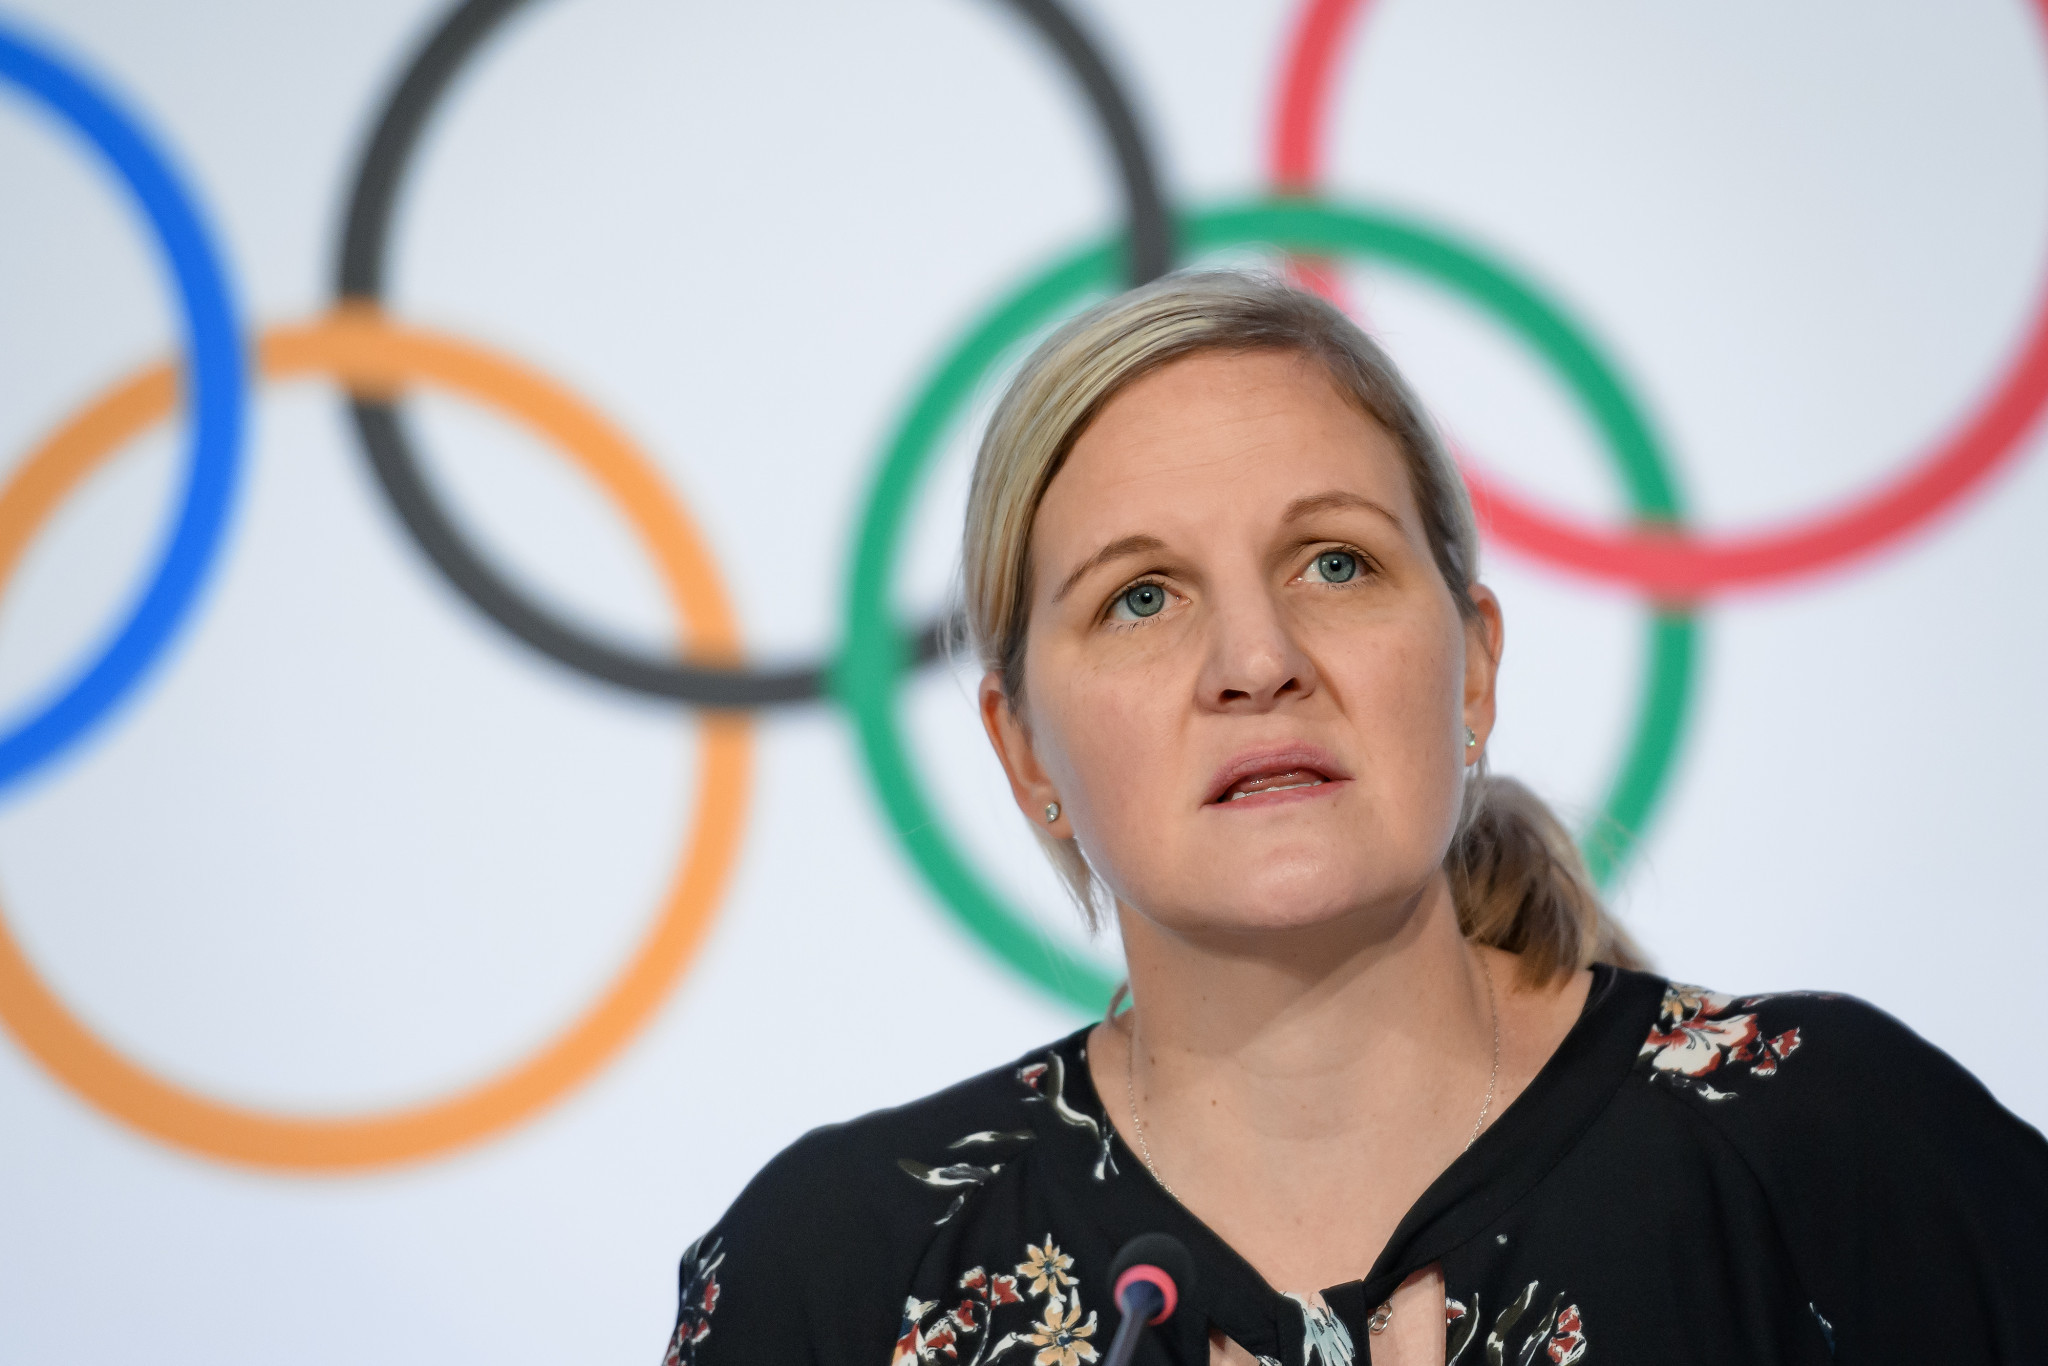 Kirsty Coventry said the Coordination Commission was "encouraged to see the progress being made by the team in Dakar" ©Getty Images